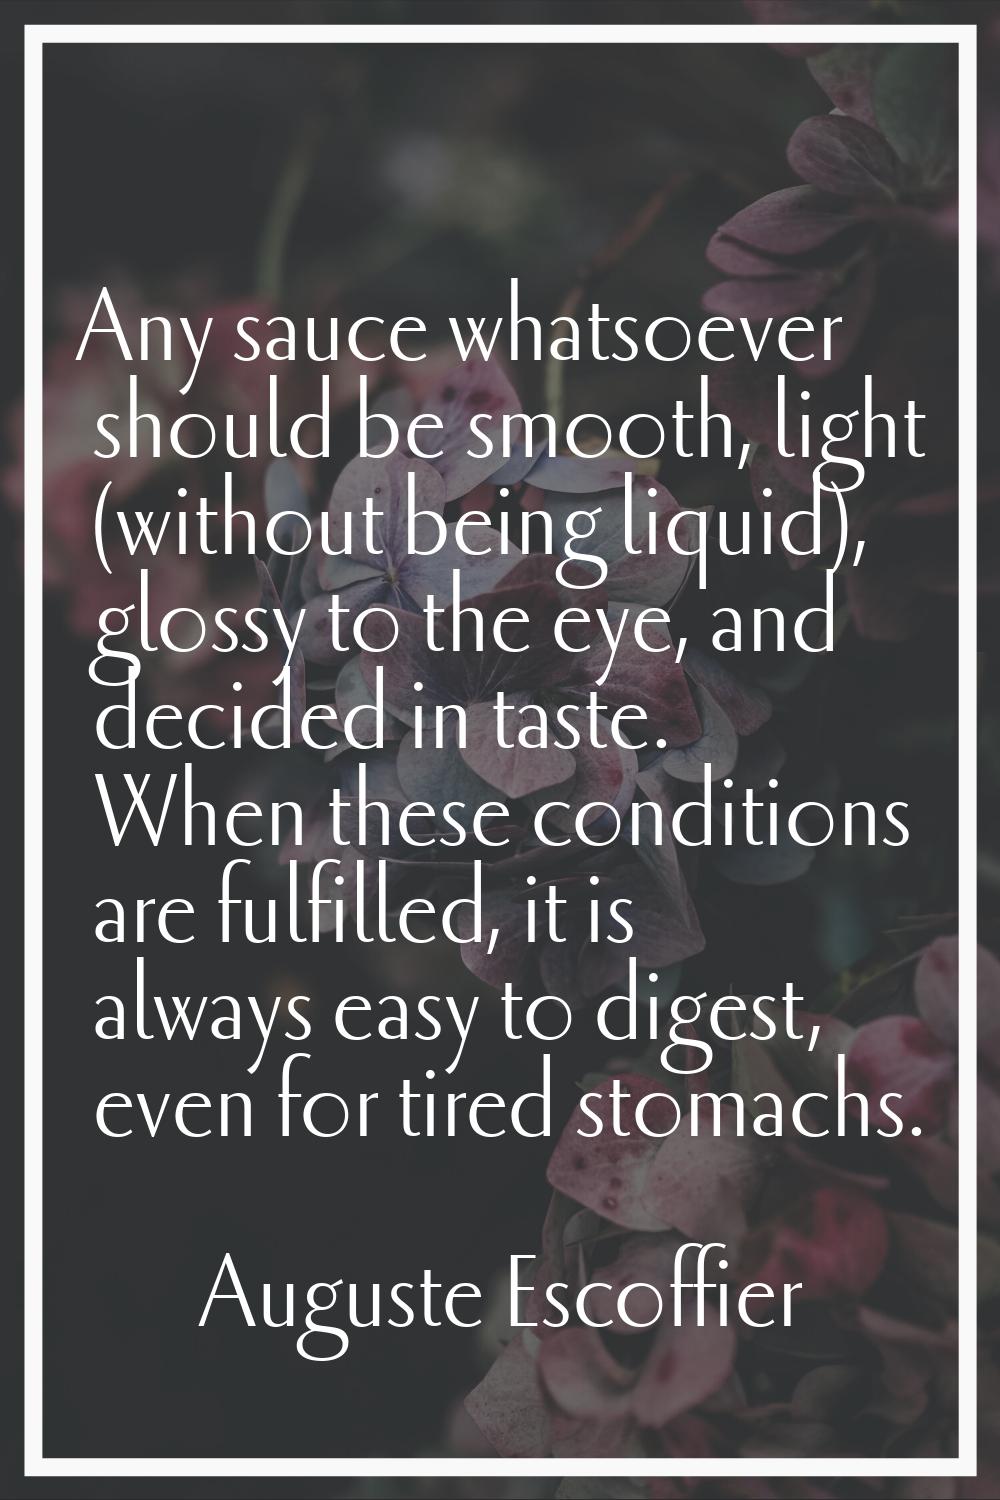 Any sauce whatsoever should be smooth, light (without being liquid), glossy to the eye, and decided